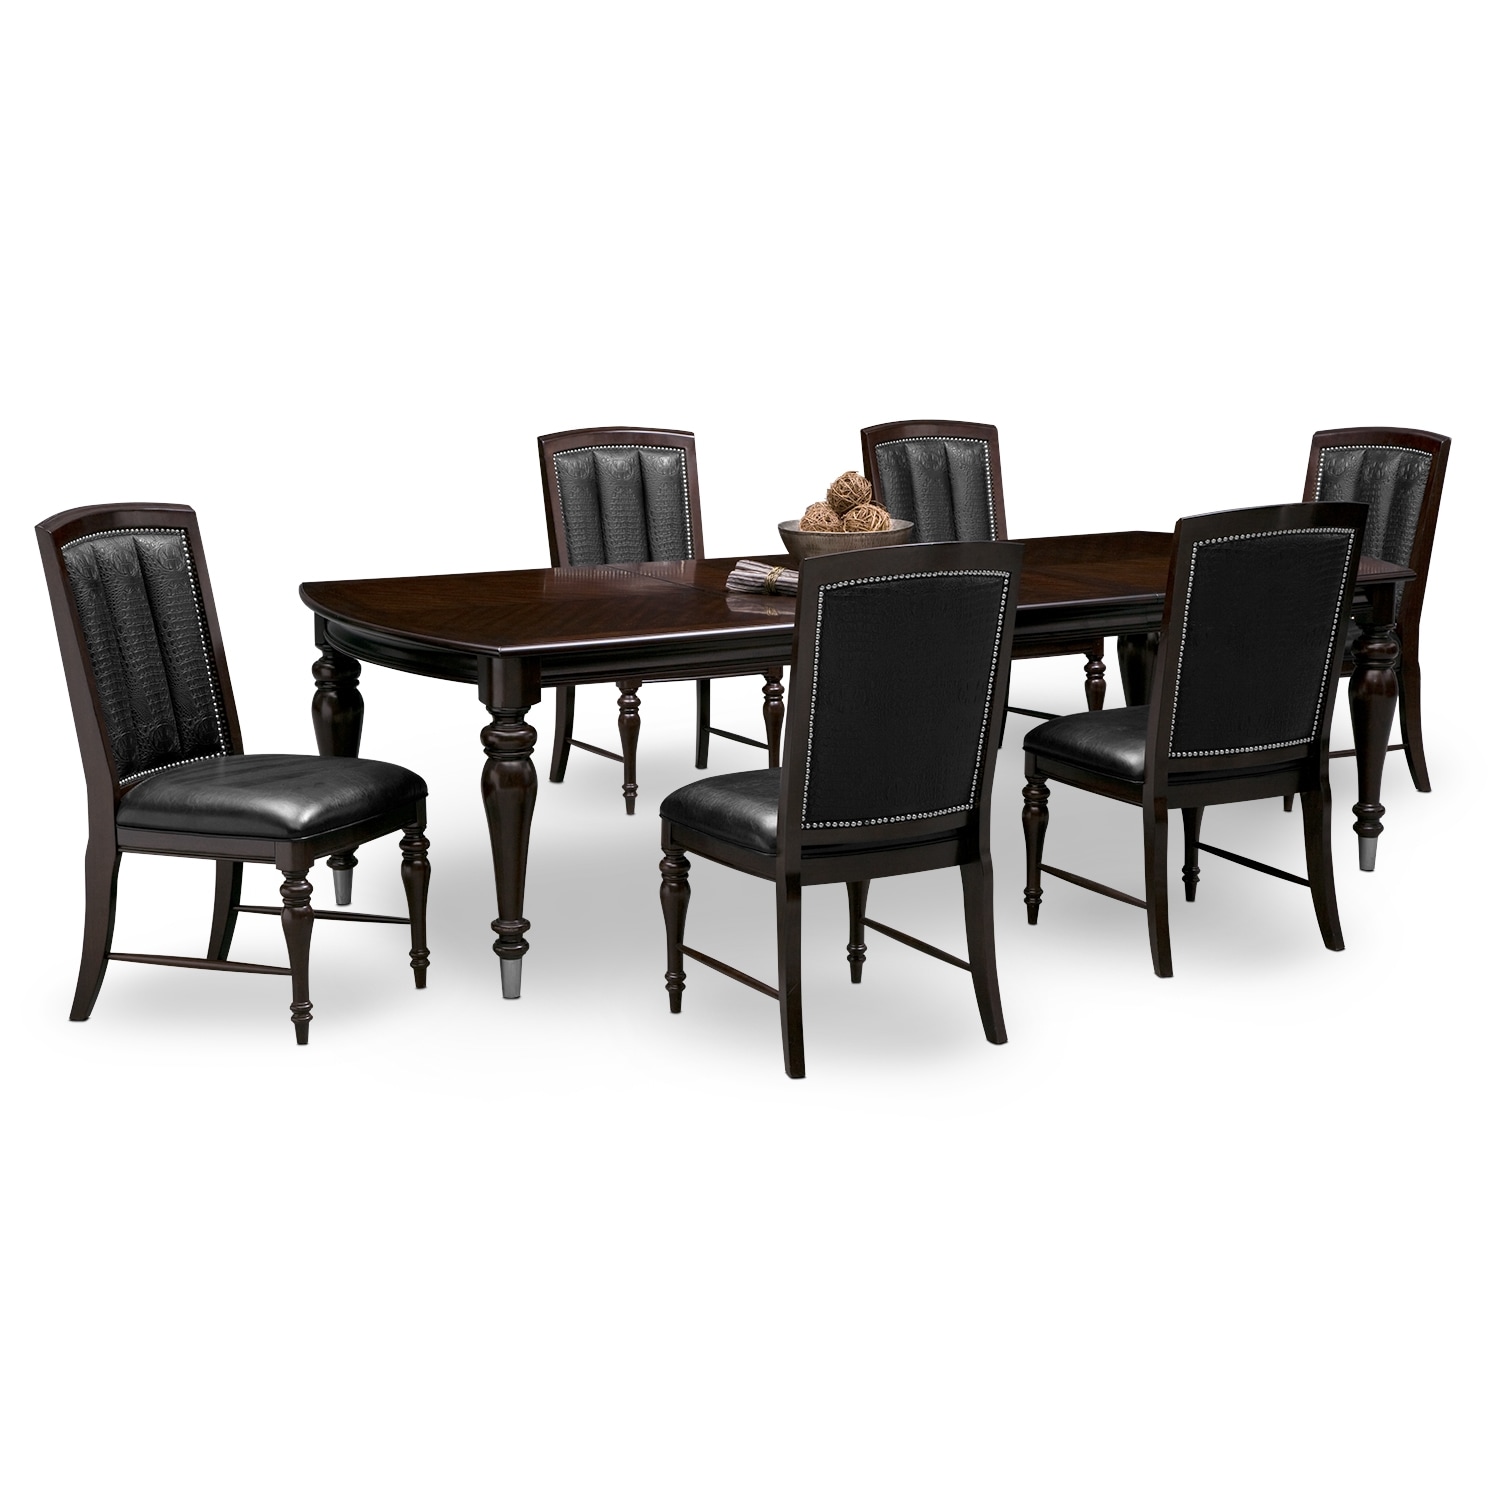 Esquire Dining Table And 6, Value City Furniture Dining Room Set